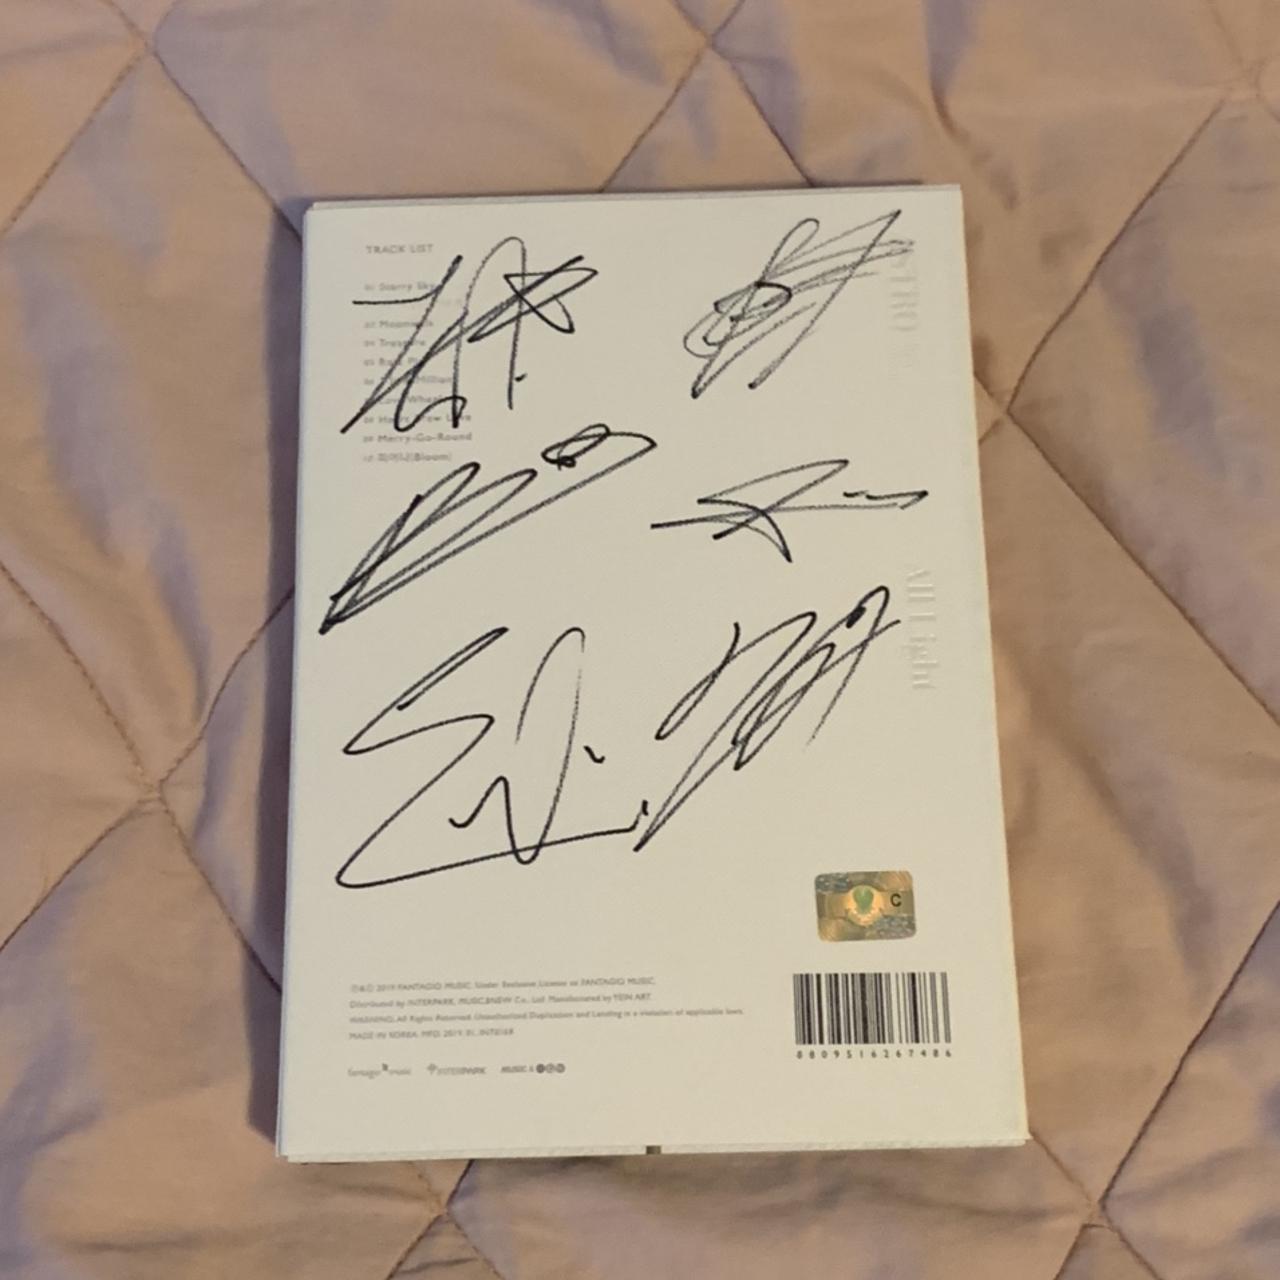 SOLD! , signed astro all light album by all members.